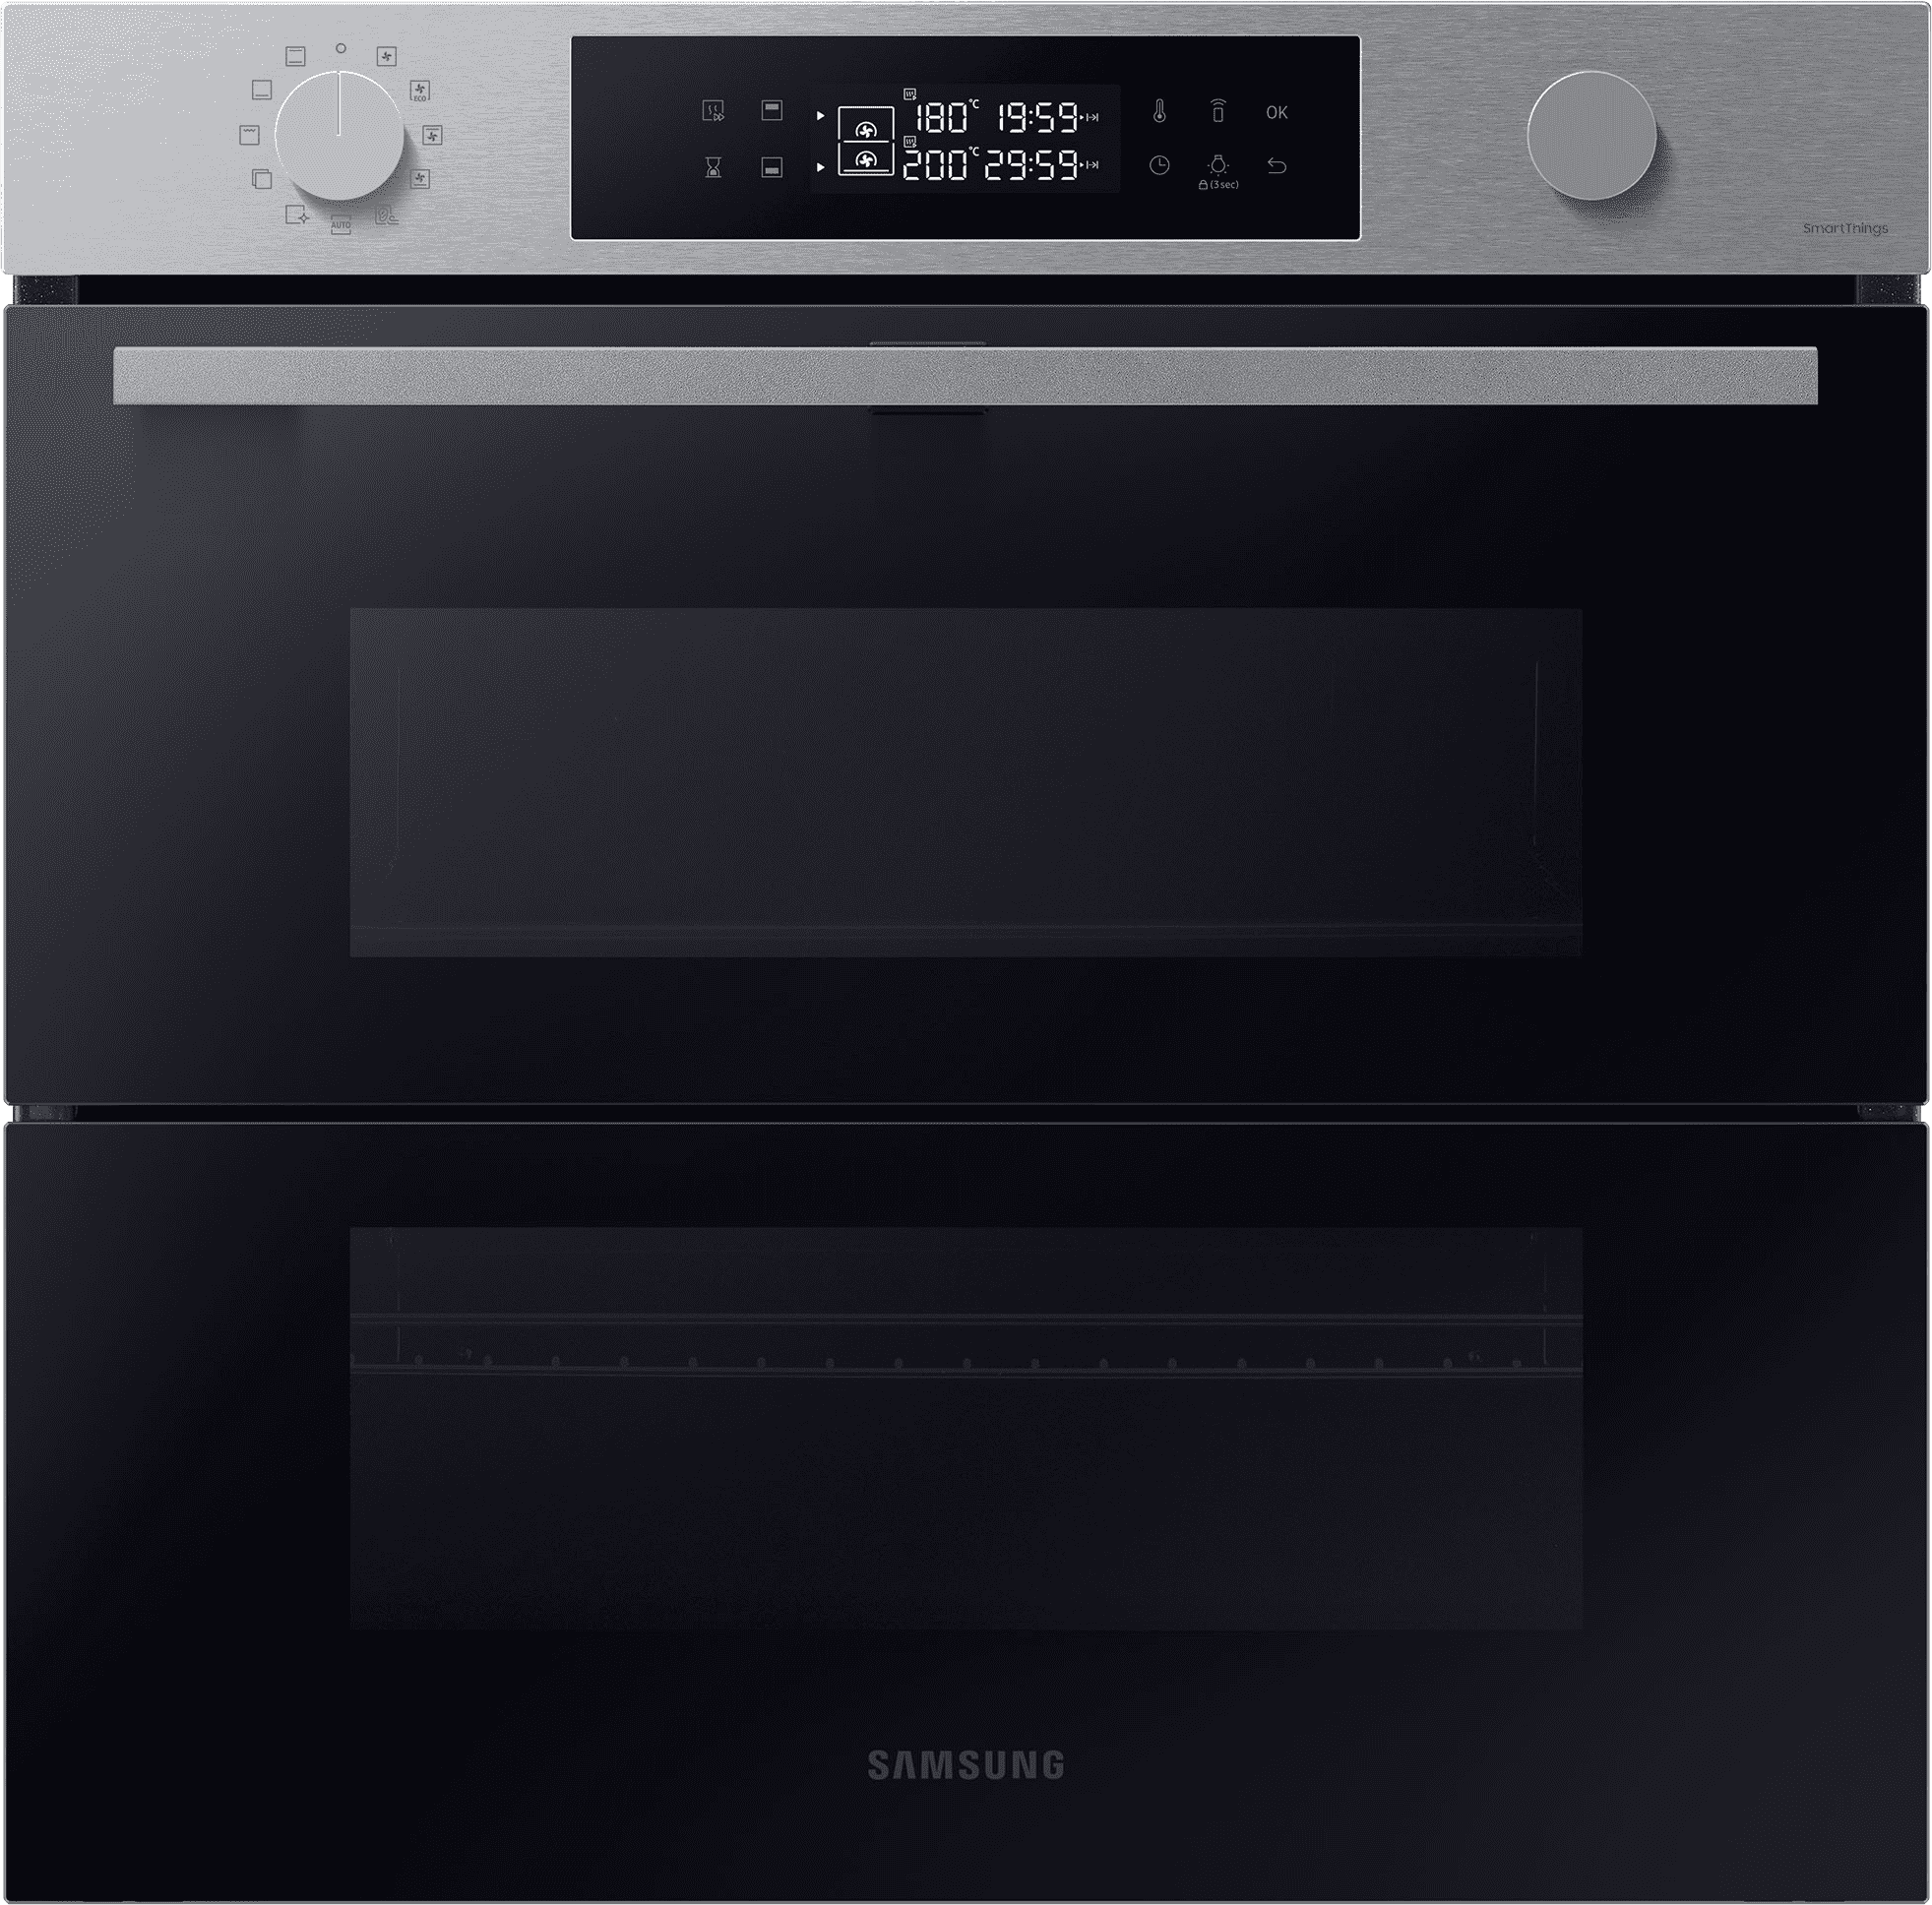 Samsung Series 4 Dual Cook Flex NV7B45305AS Wifi Connected Built In Electric Single Oven and Pyrolytic Cleaning - Stainless Steel - A+ Rated, Stainless Steel